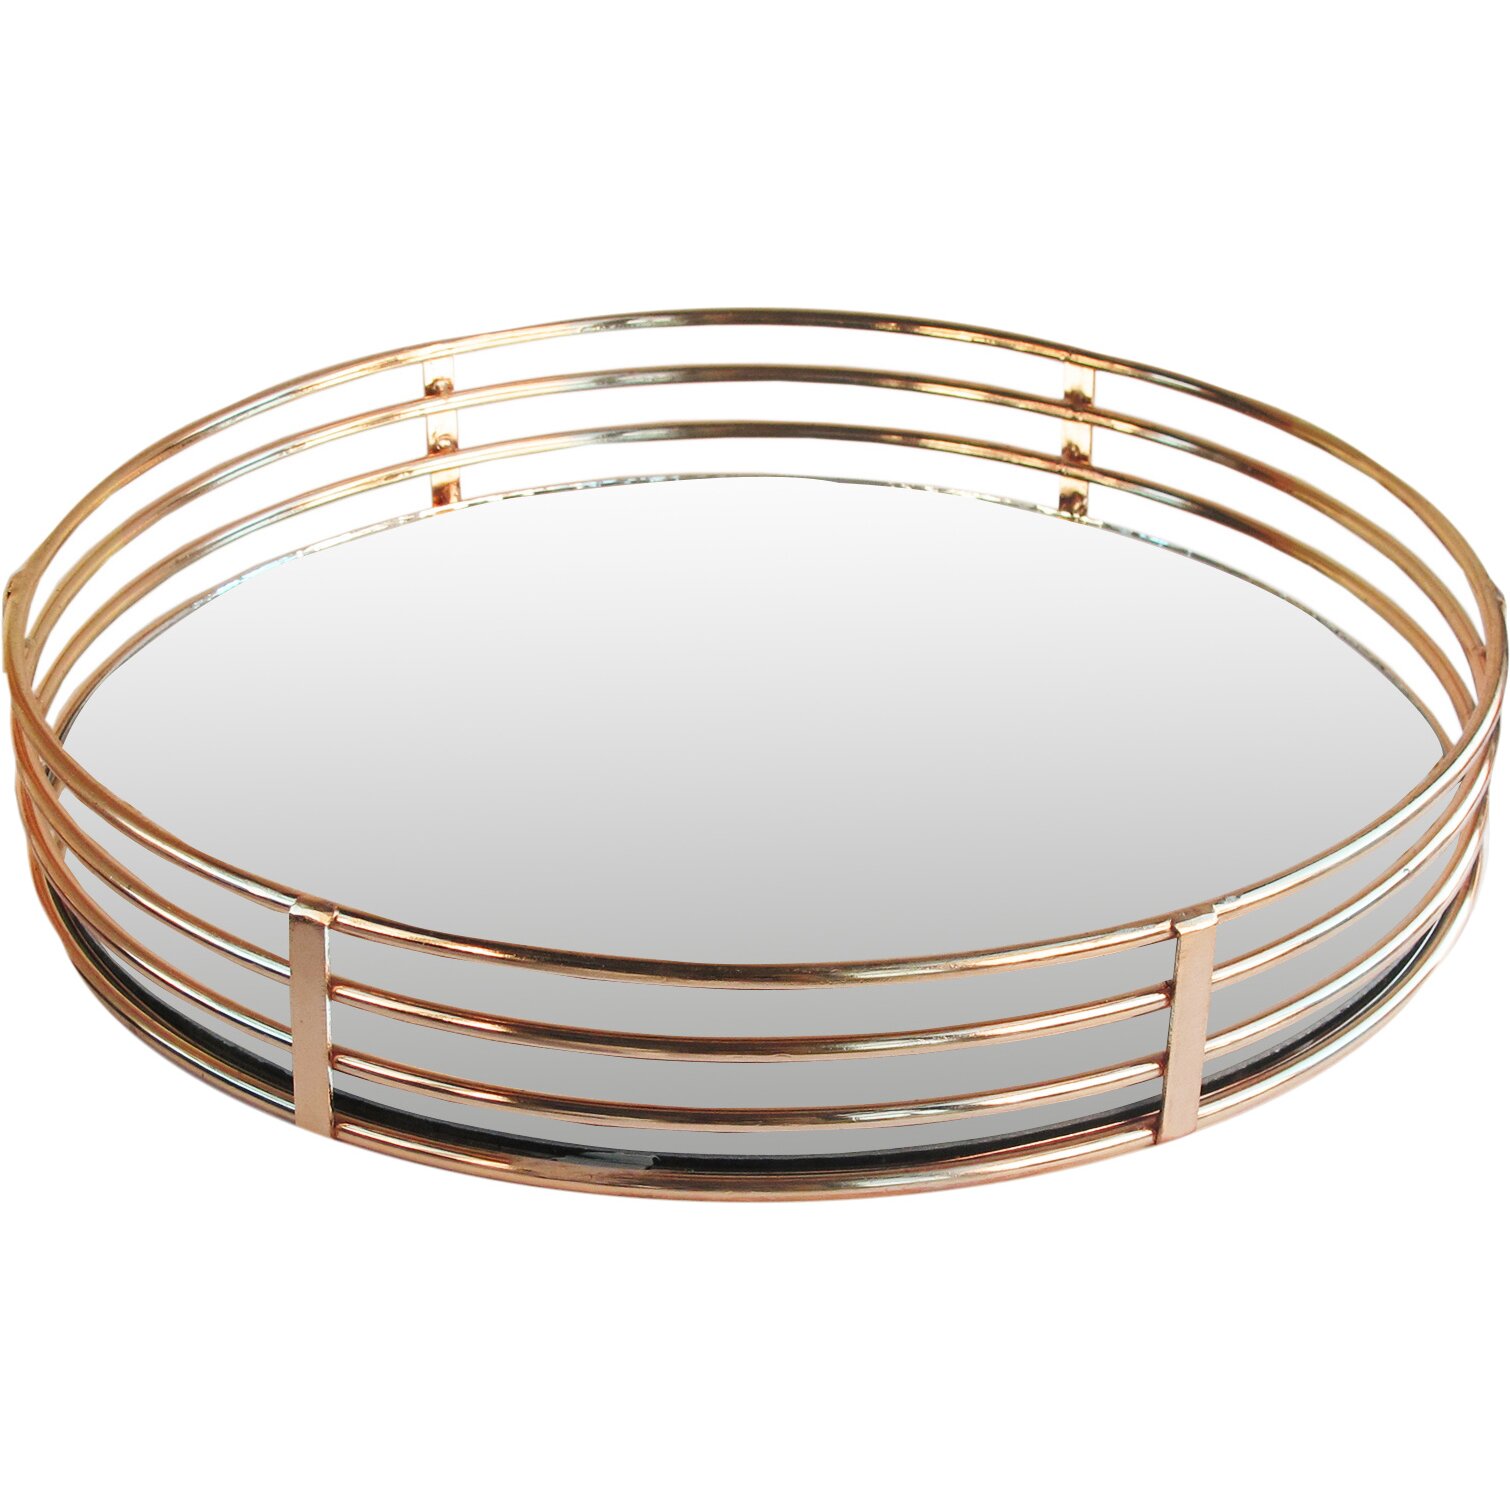 Allure by Jay Circle Copper Tray & Reviews | Wayfair